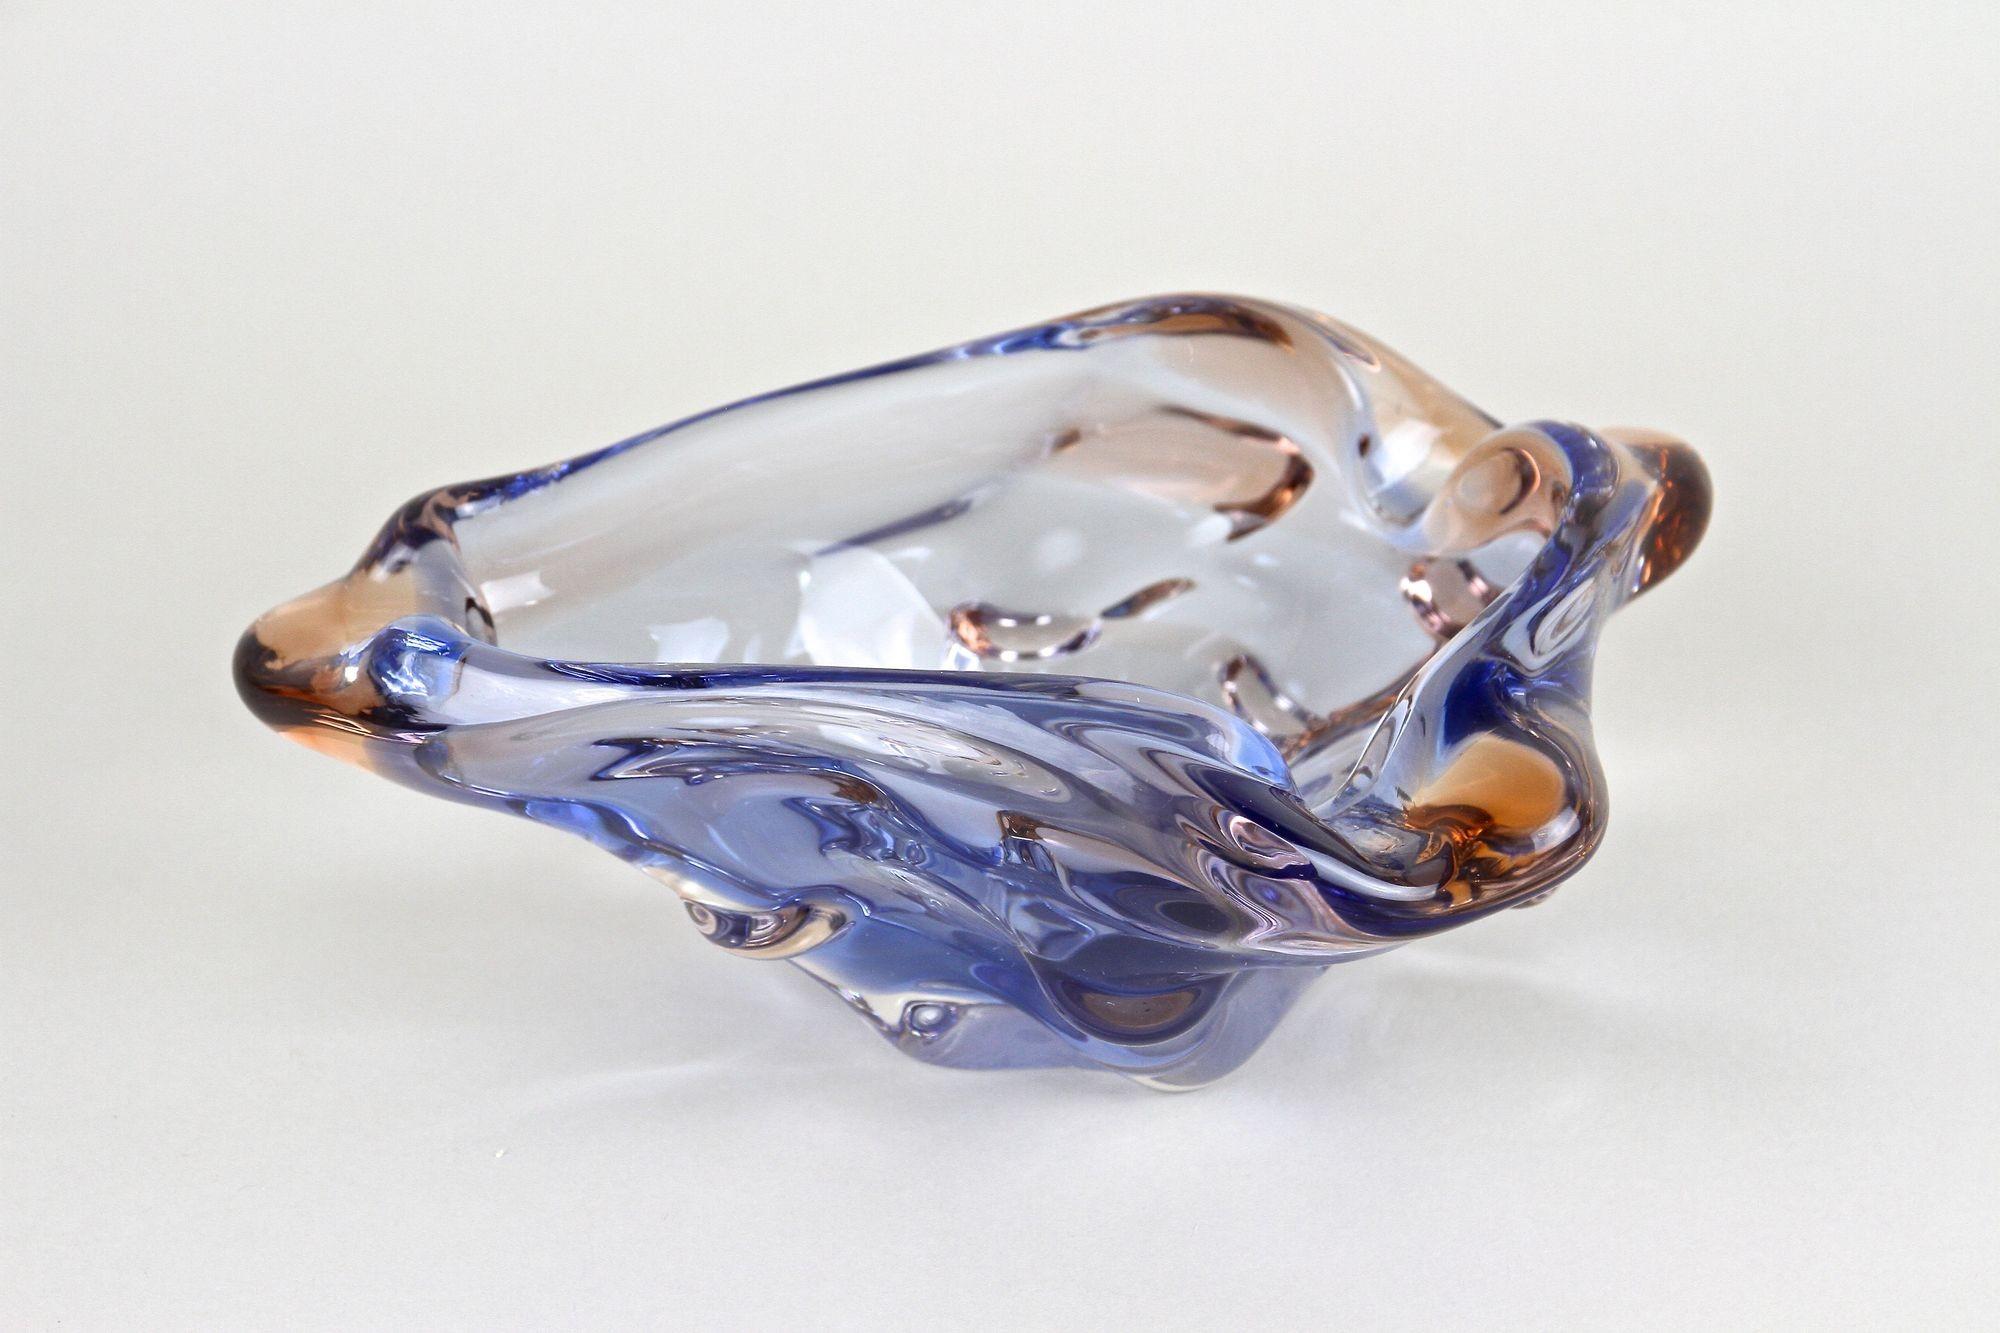 Extraordinary small Murano glass bowl coming from the famous workshops in Italy from the period around 1960/70. Colored in a fantastic blue and amber tone, this amazing designed, contemporary glass bowl impresses with its unusual shaped body - just